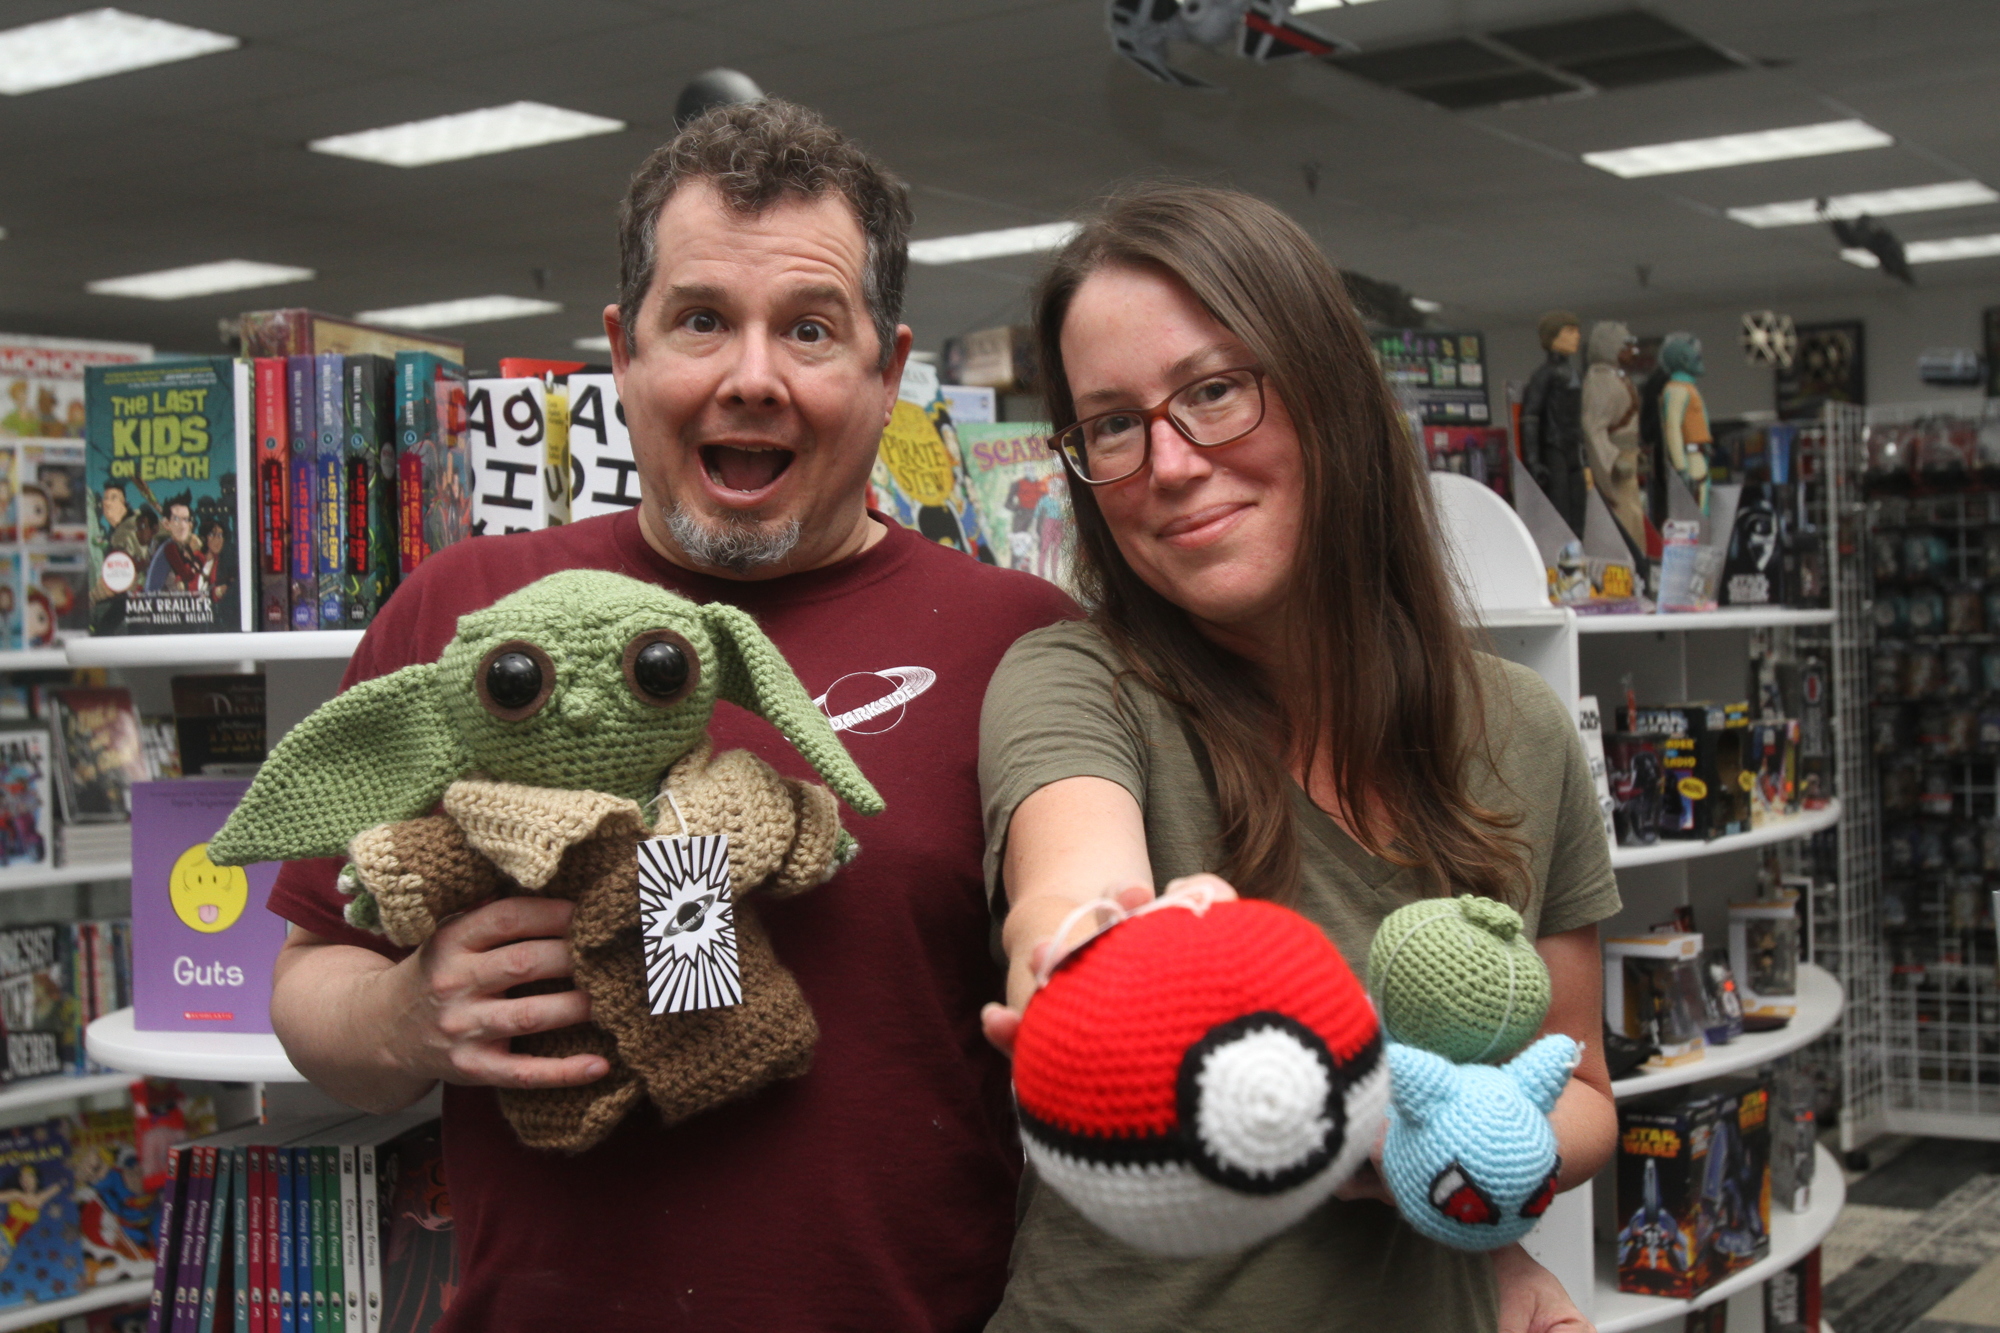 Brian Polizzi has started selling his wife's creation's at the Dark Side comic shop.